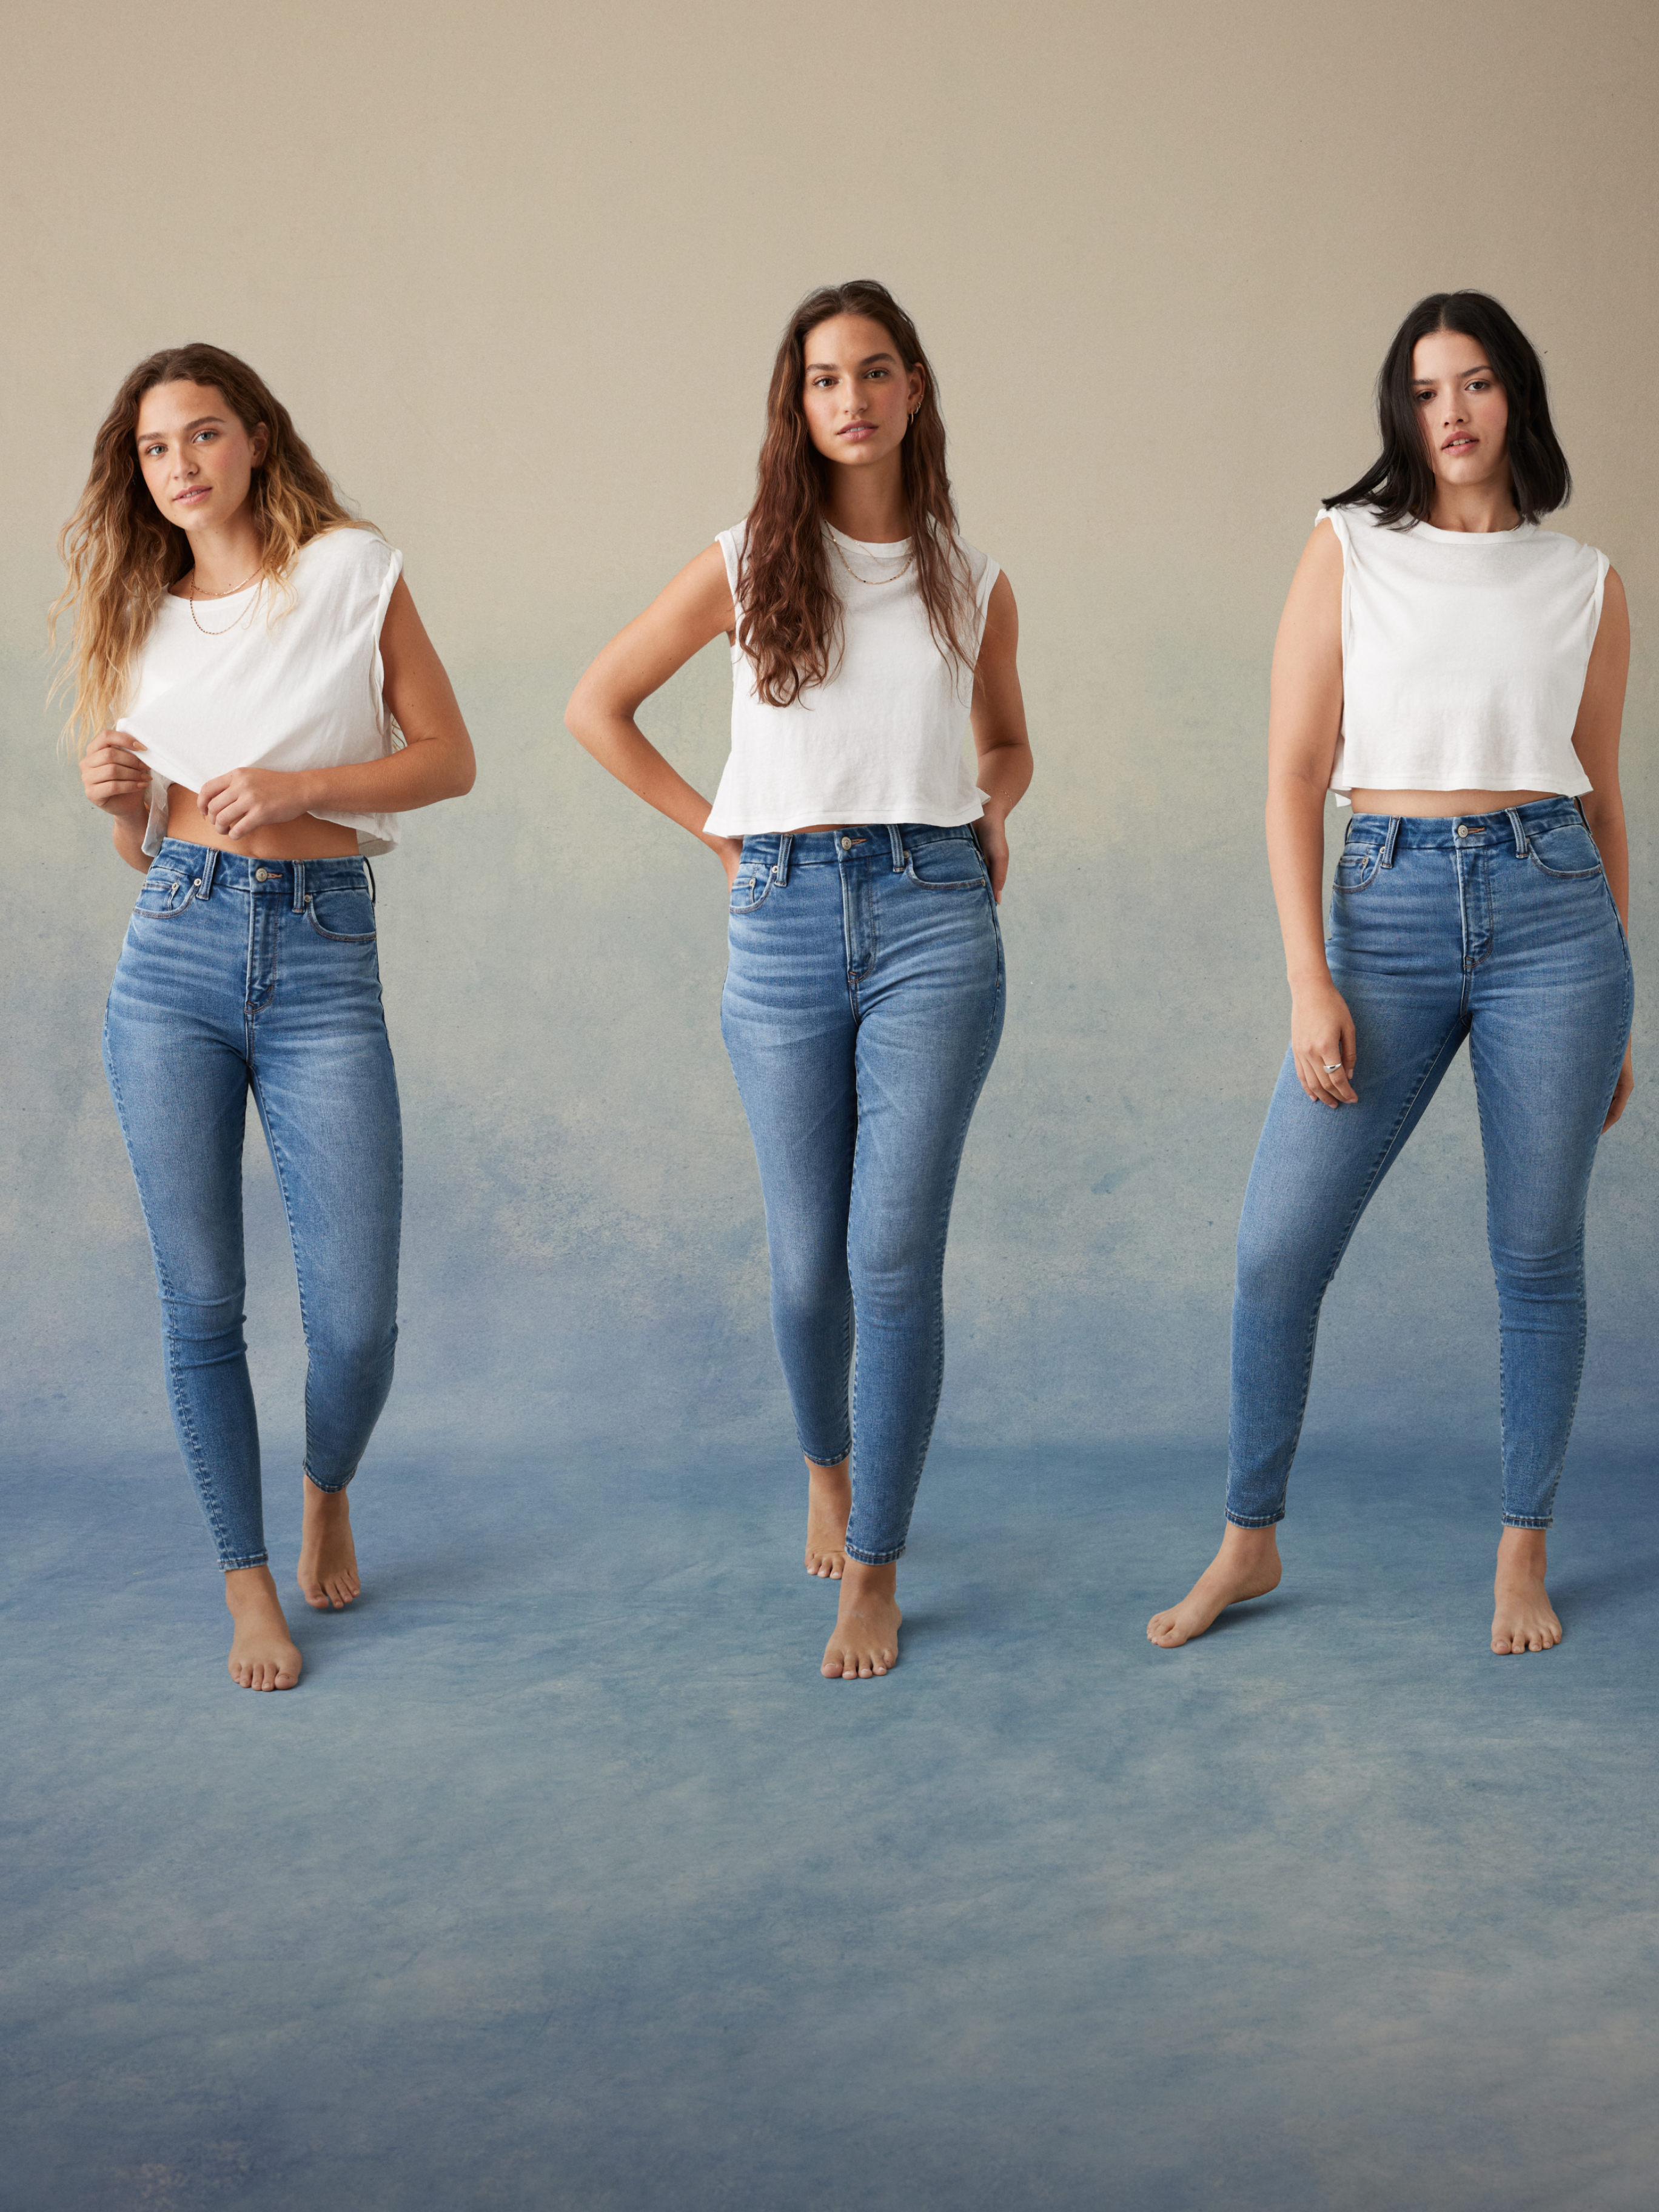 Can You Wear Jeggings To Work?